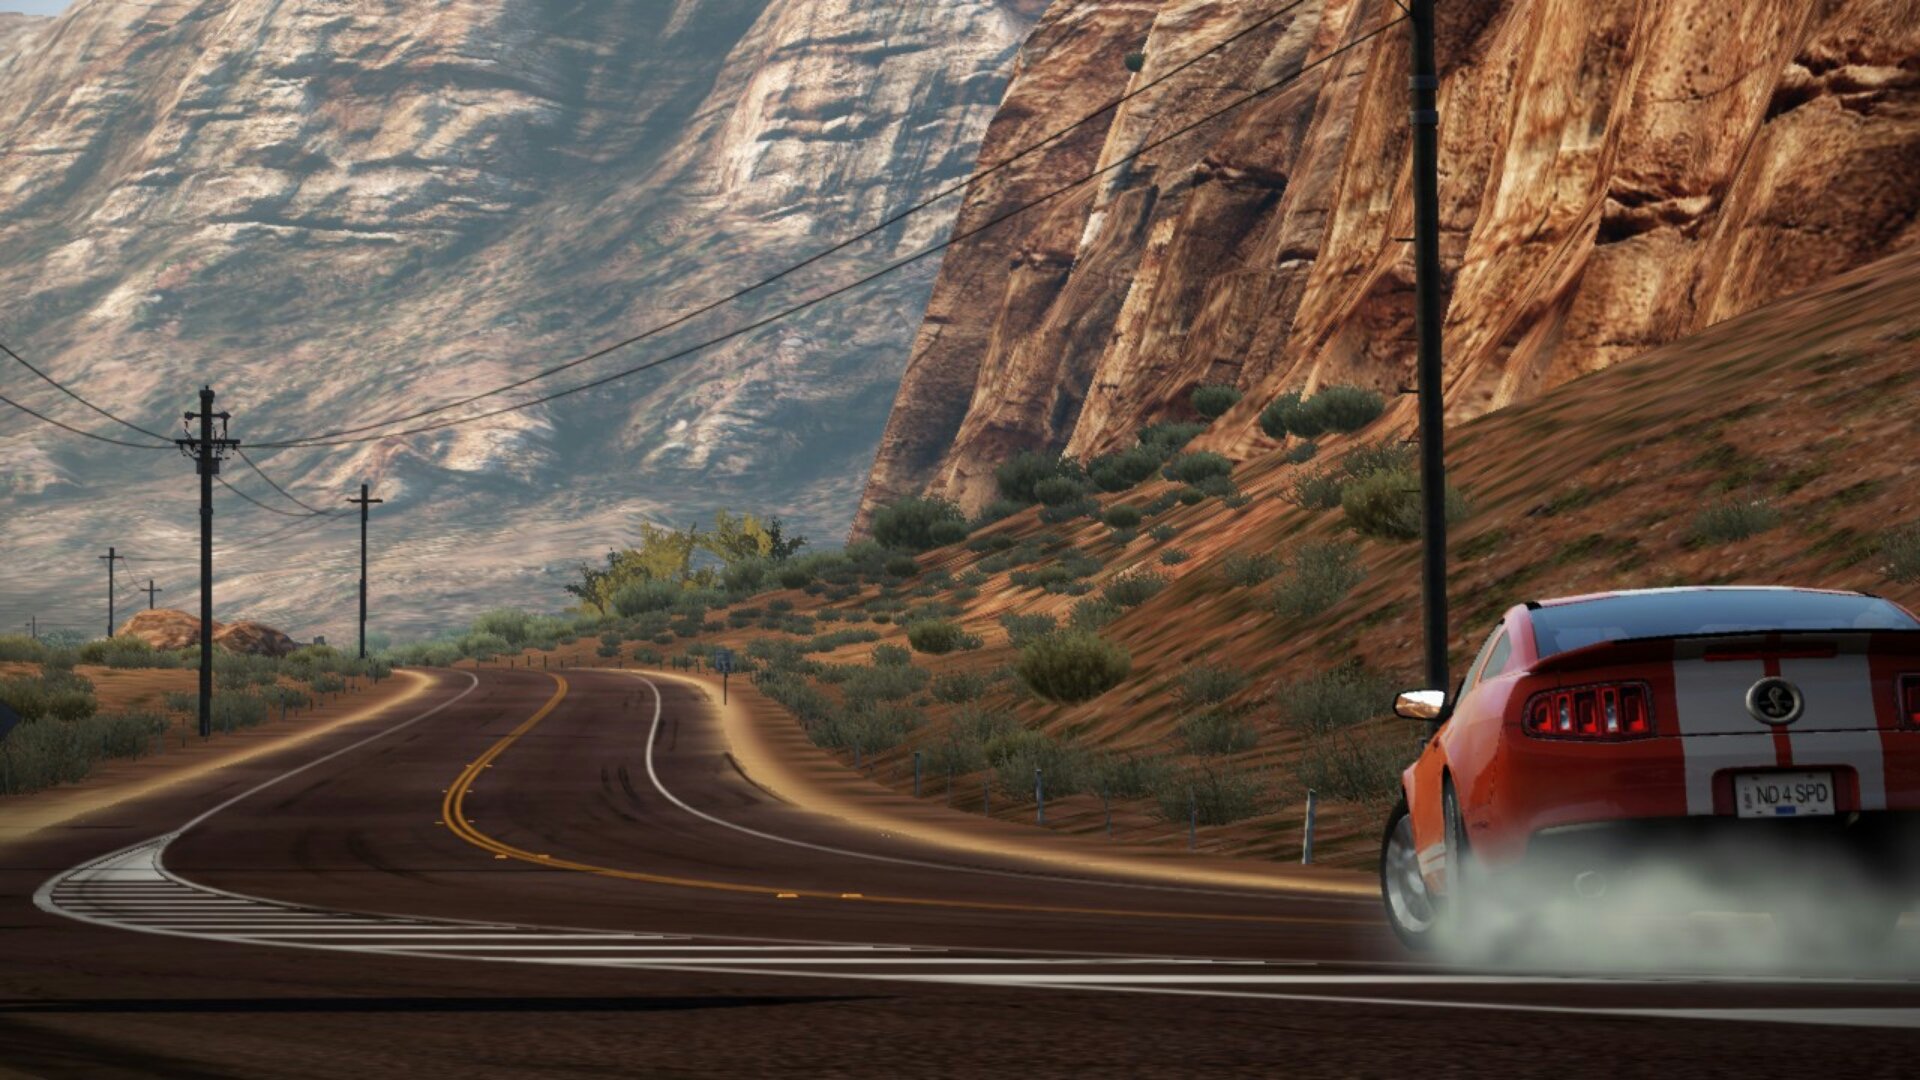 Awesome Need For Speed: Hot Pursuit free background ID:256257 for hd 1920x1080 desktop